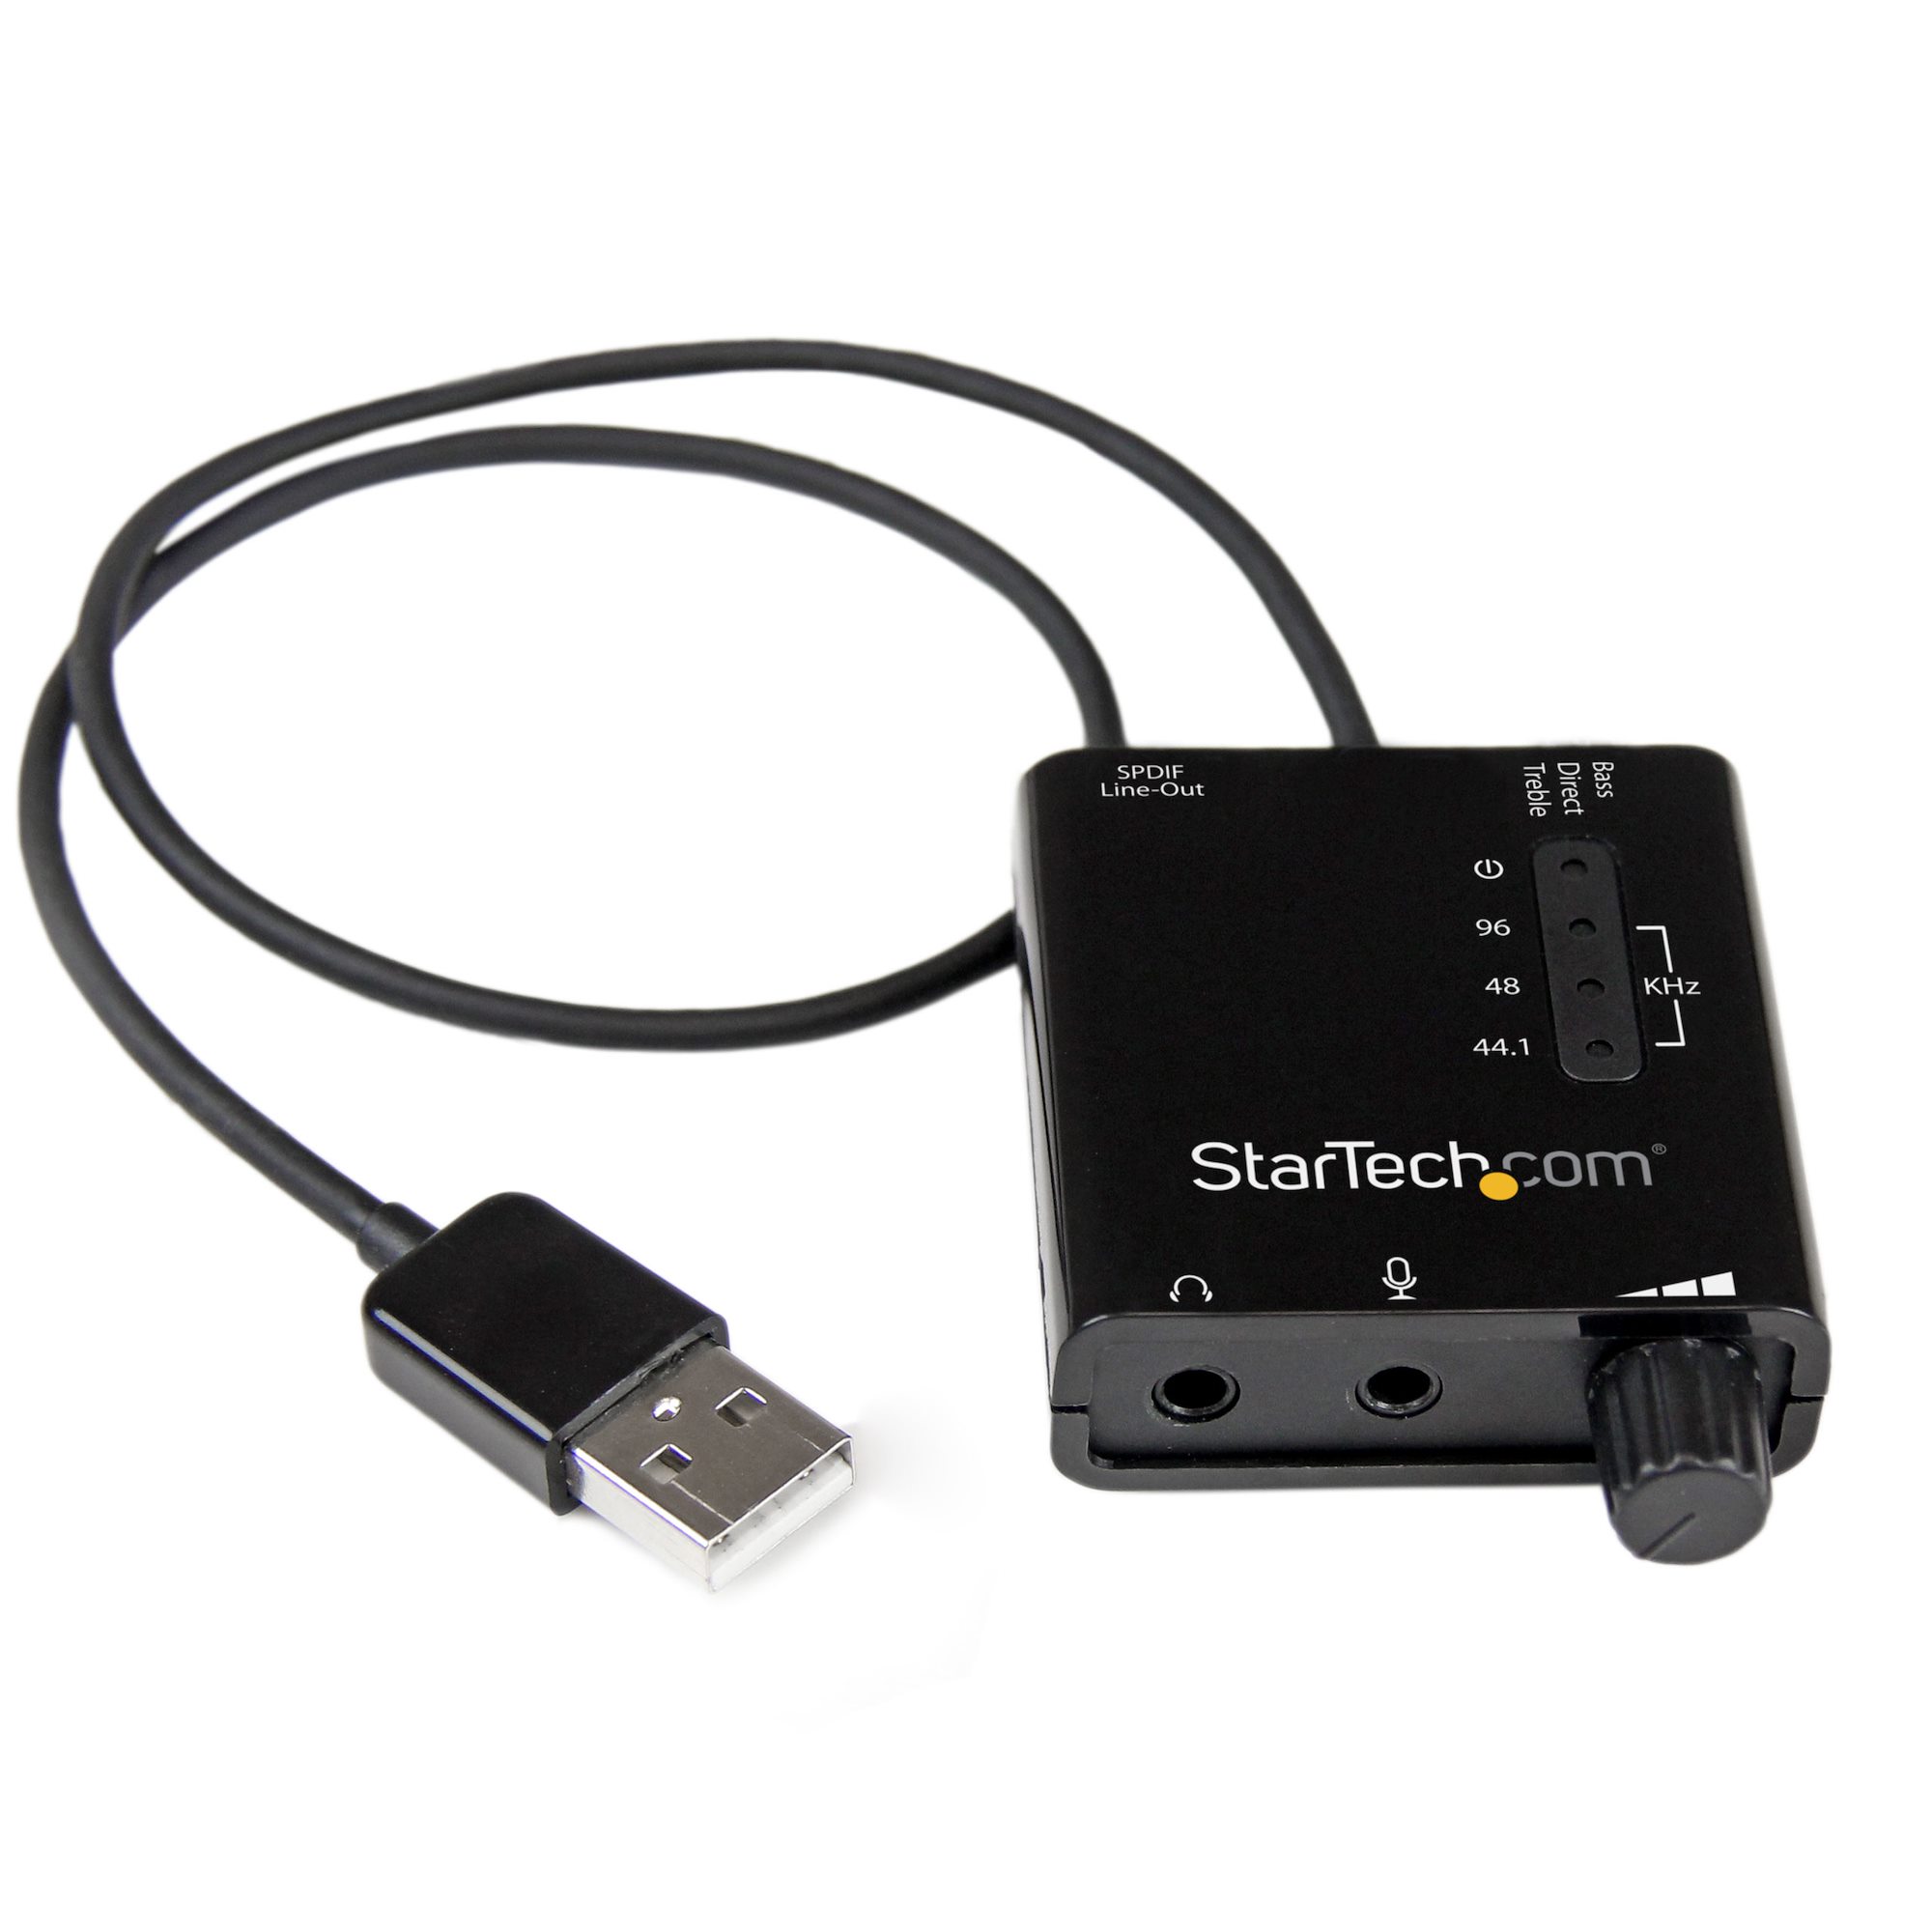 Opdatering Forfatter areal USB Sound Card Audio Adapter w/ SPDIF - USB Audio Adapters | StarTech.com